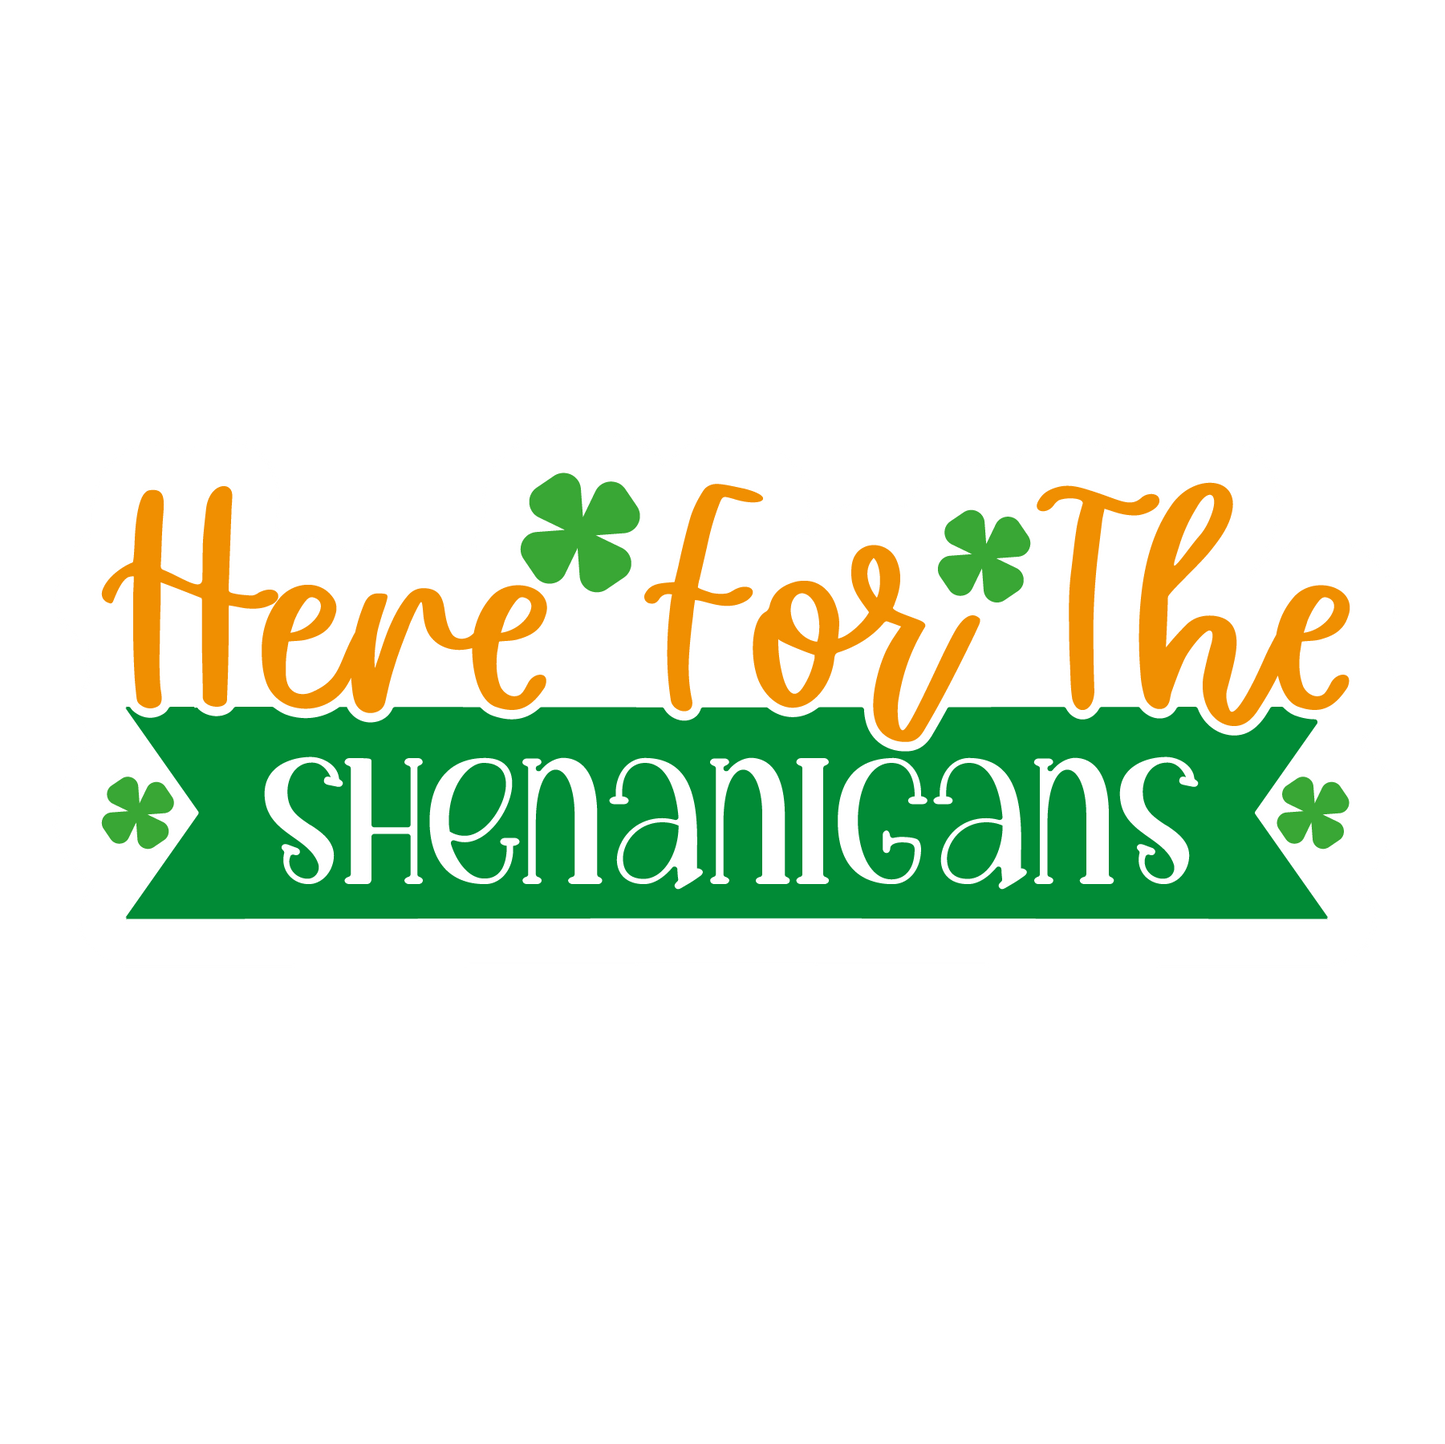 Inspirational Quote Here for The Shenanigans. Motivational Sticker Vinyl Decal Motivation Stickers- 5" Vinyl Sticker Waterproof